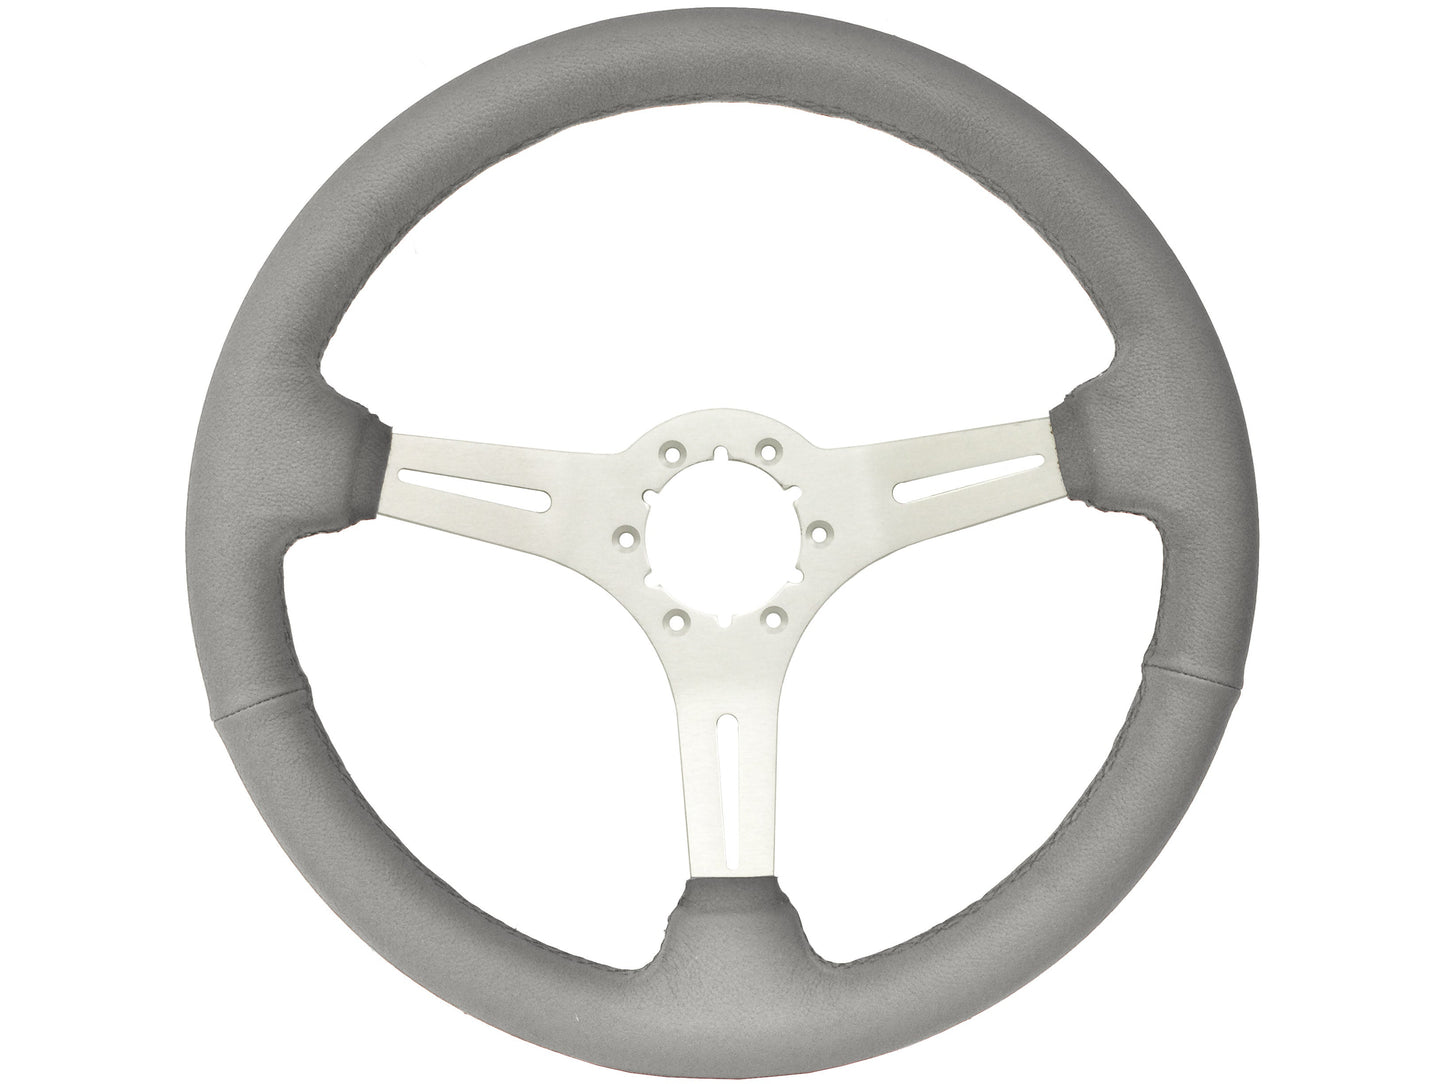 1970-76 Ford Torino Steering Wheel Kit | Grey Leather | ST3014GRY